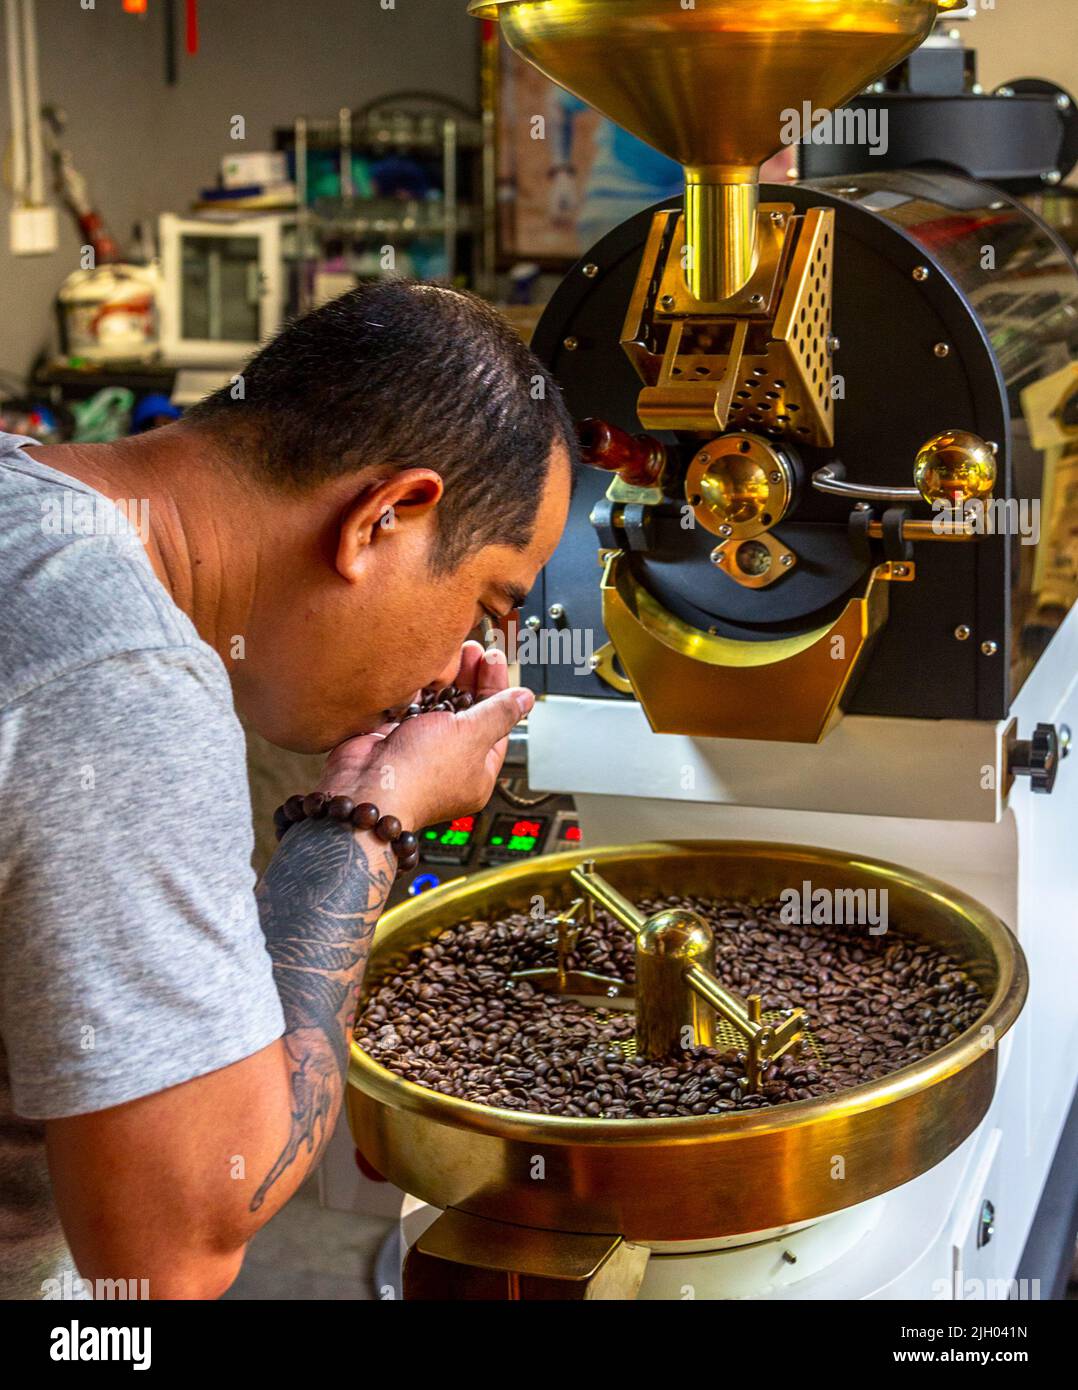 Mr. Thanh checks the coffee beans before taking the next step.  Coffee houses and cafes are very popular in Vietnam as a producer grower too. Stock Photo